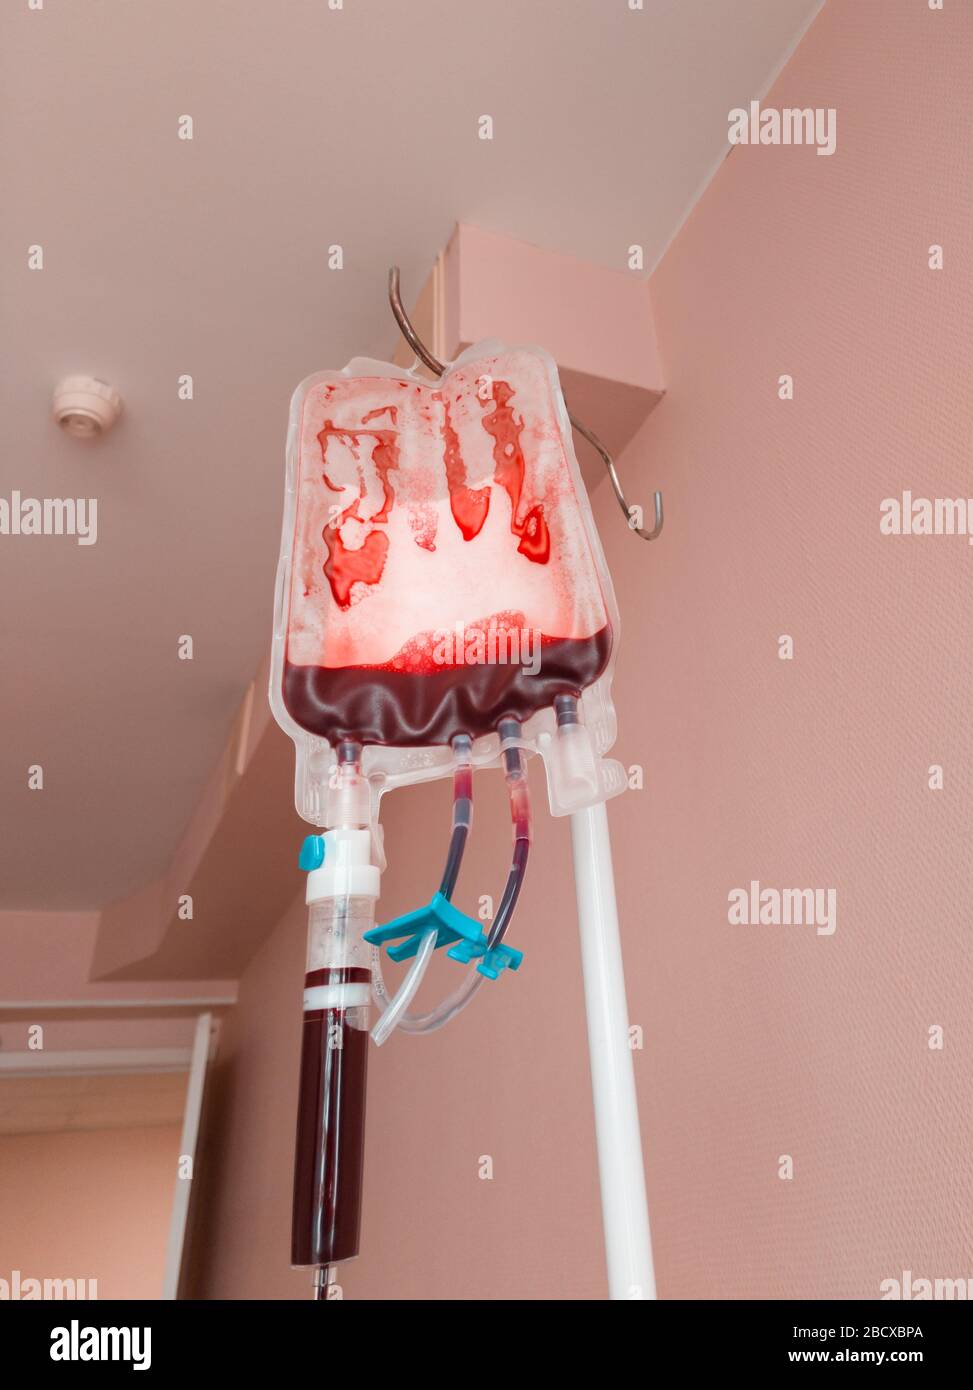 Blood transfusion at the final stage of the operation. Almost empty blood bag on a rack. Vertical photo Stock Photo